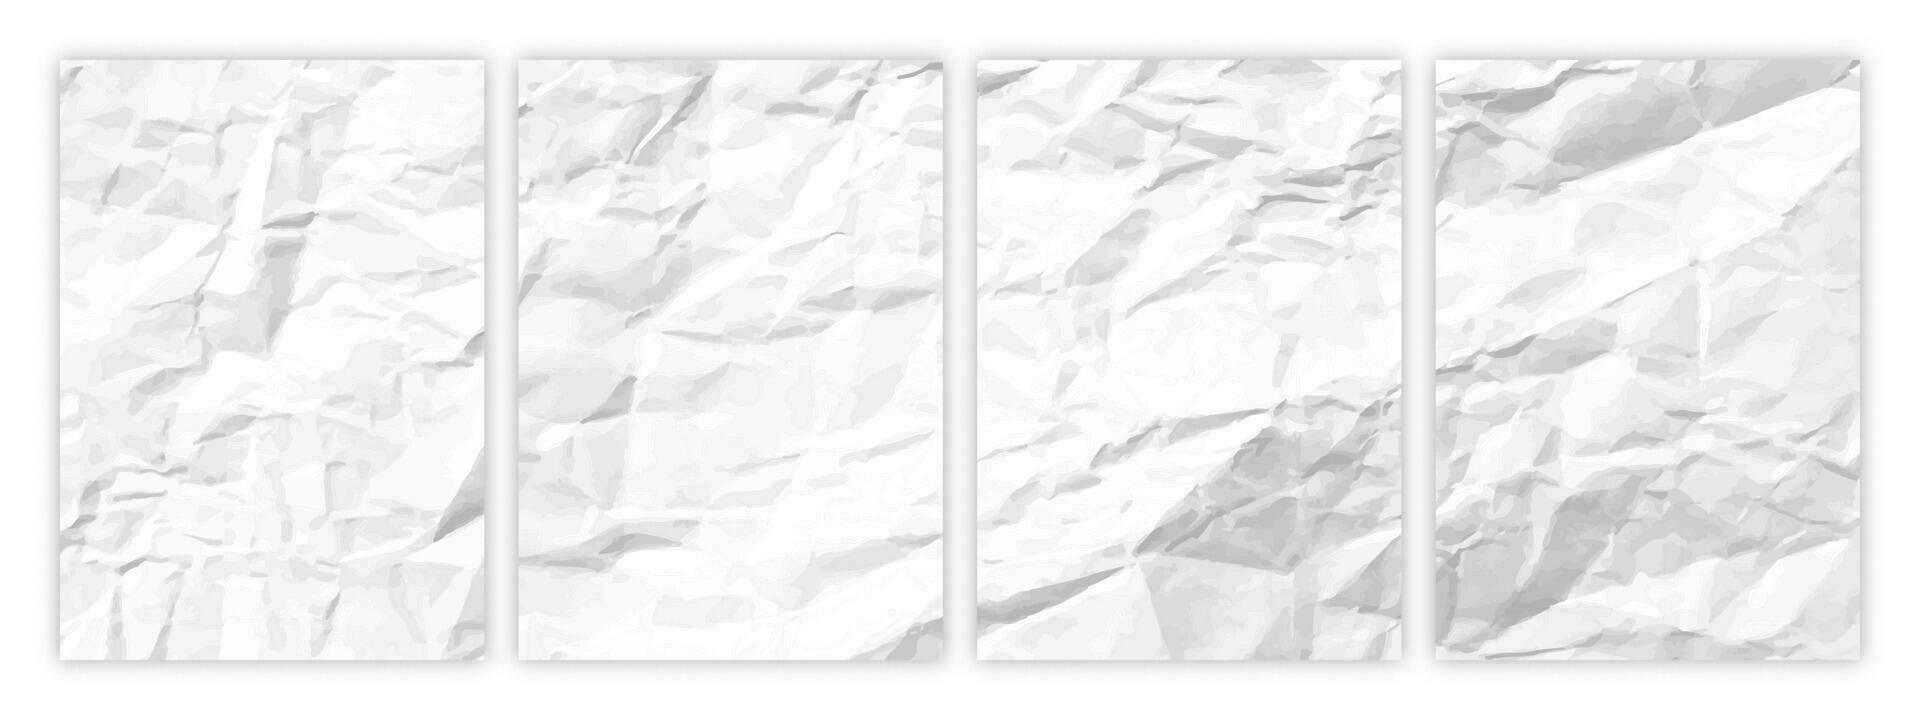 Set of A4 pages crumpled paper vector